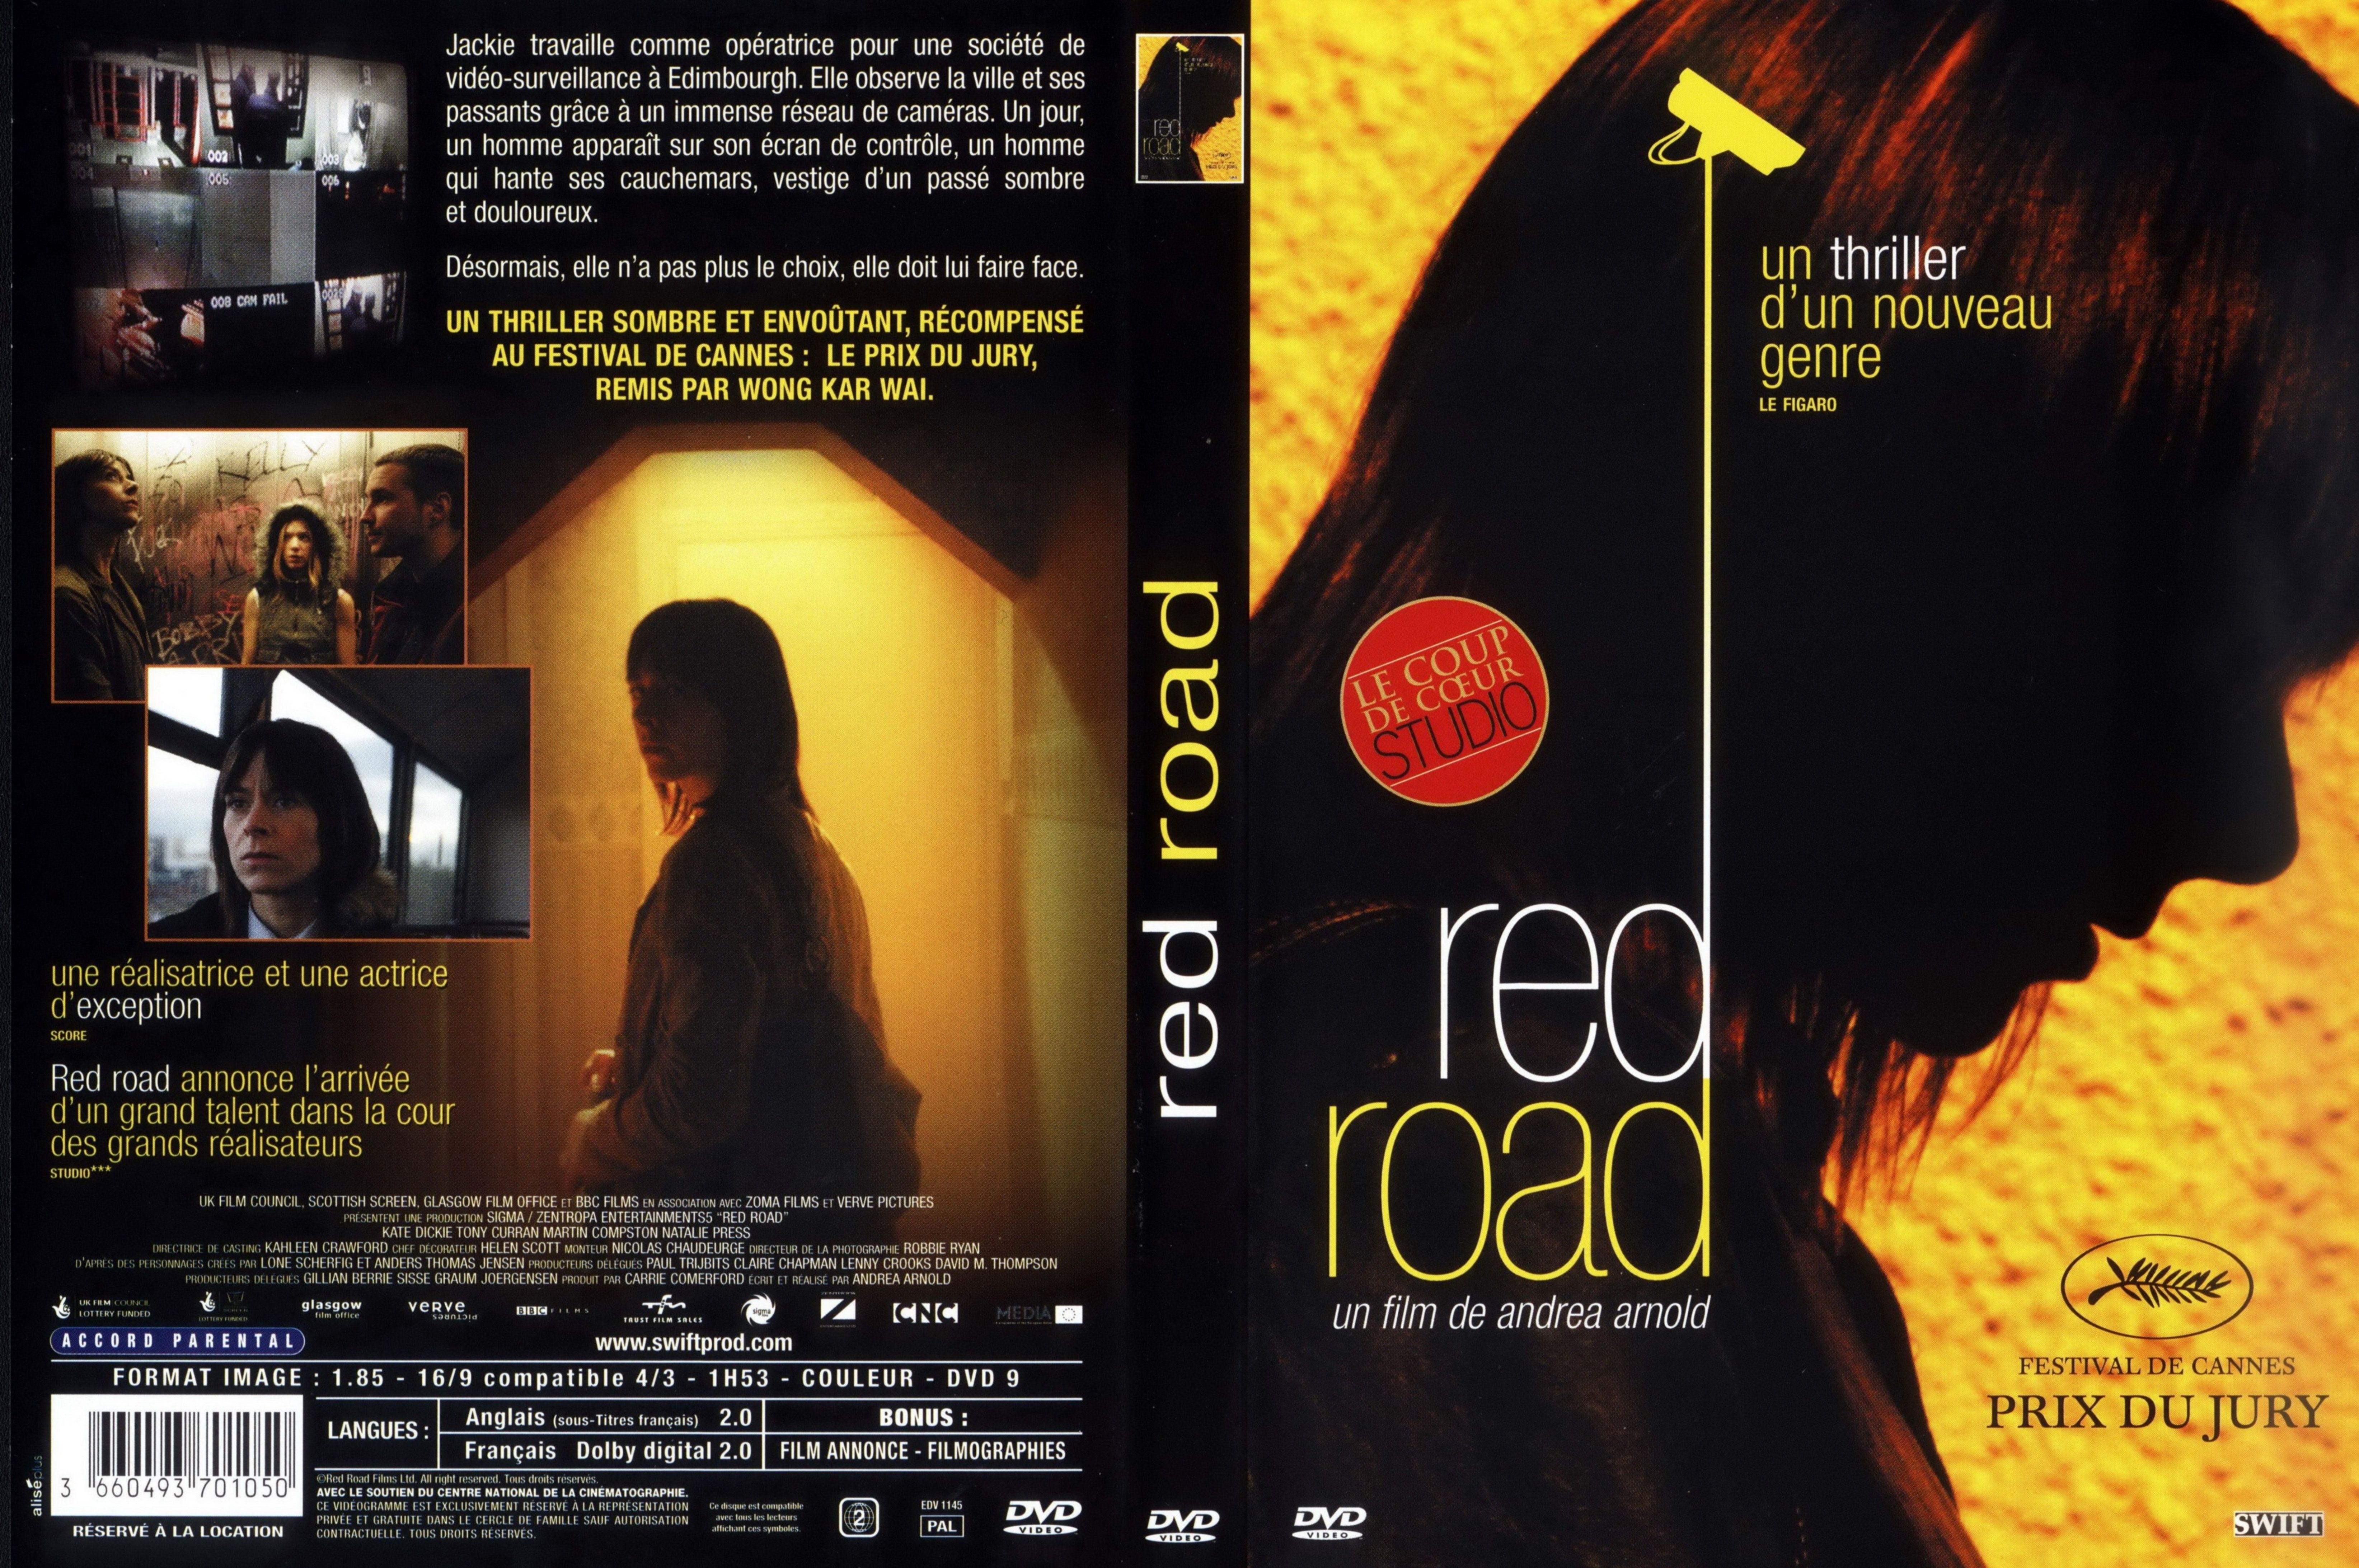 Jaquette DVD Red road